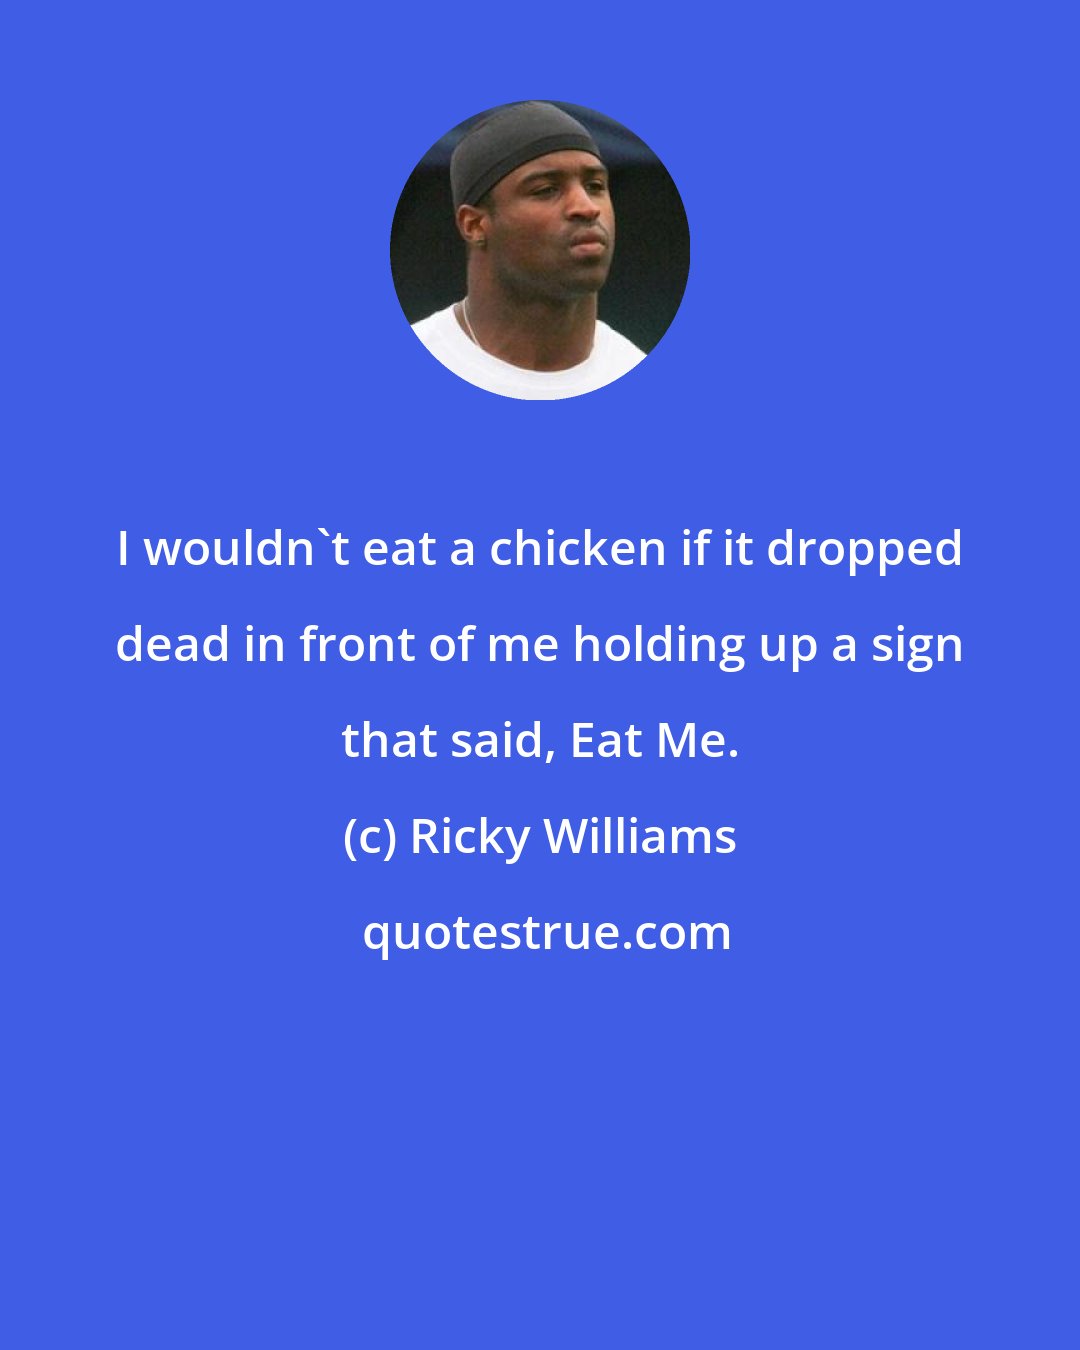 Ricky Williams: I wouldn't eat a chicken if it dropped dead in front of me holding up a sign that said, Eat Me.